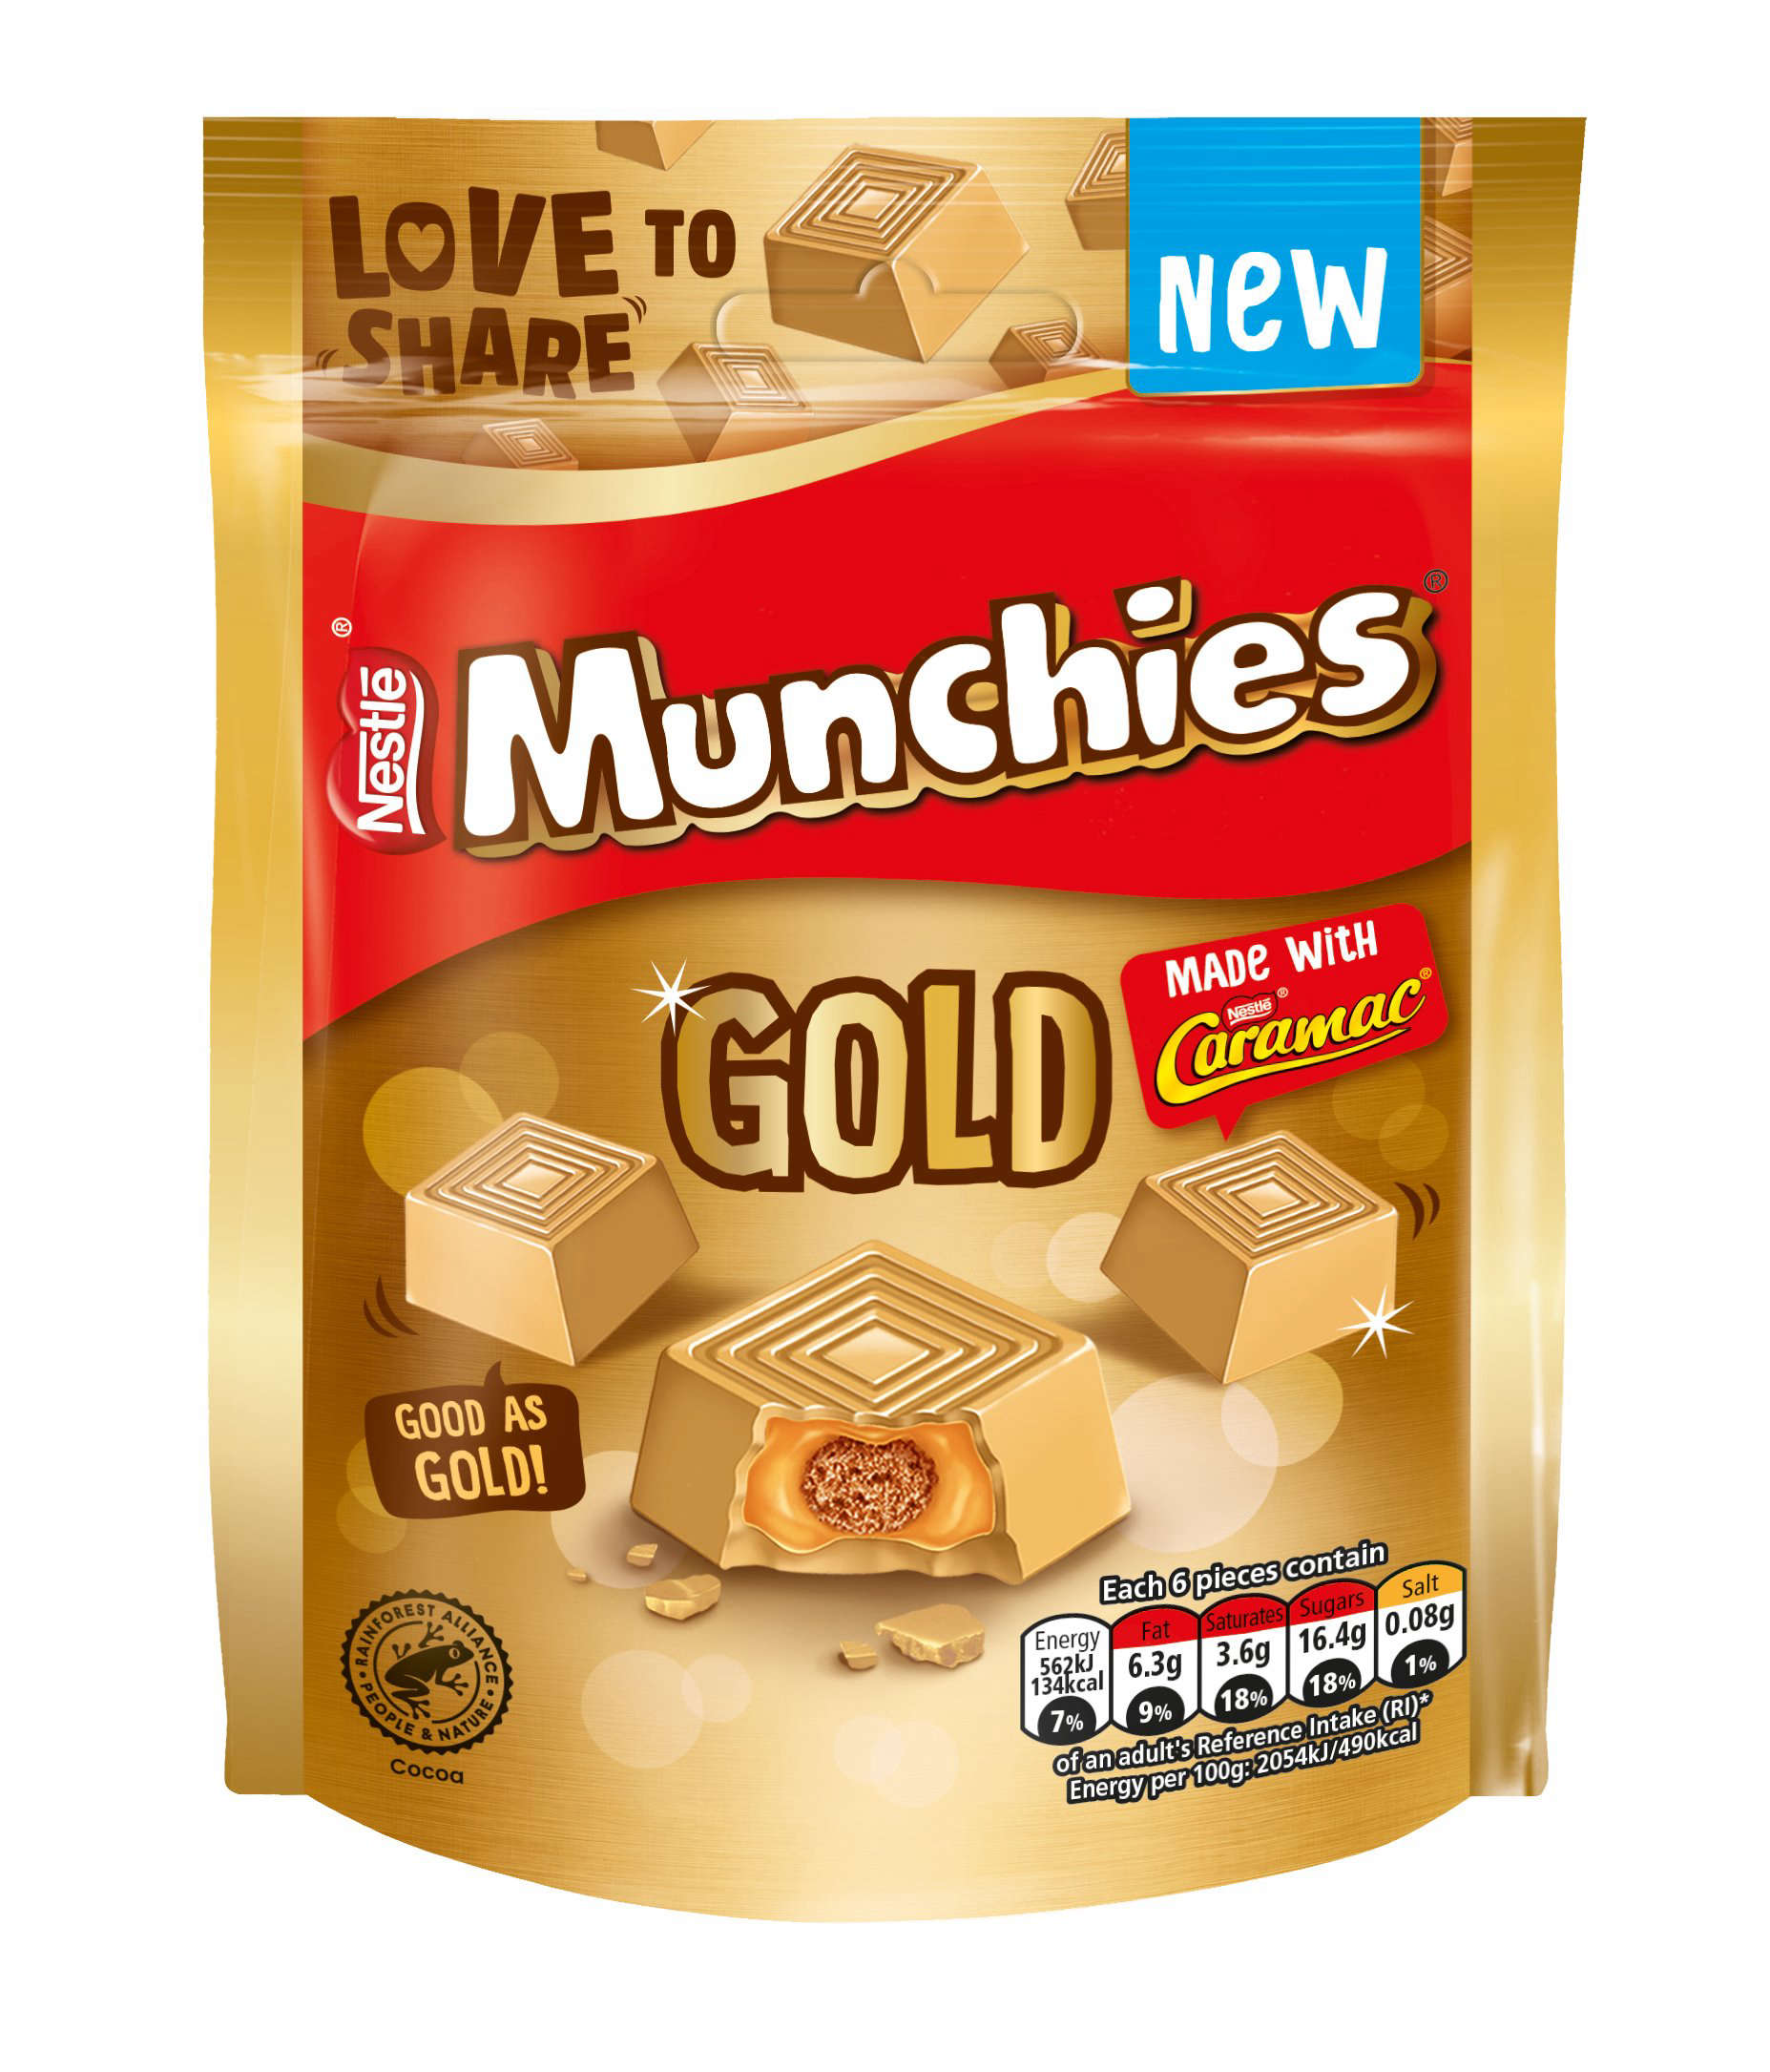 Milkybar Gold Buttons: Milkybar Releases Gold Buttons